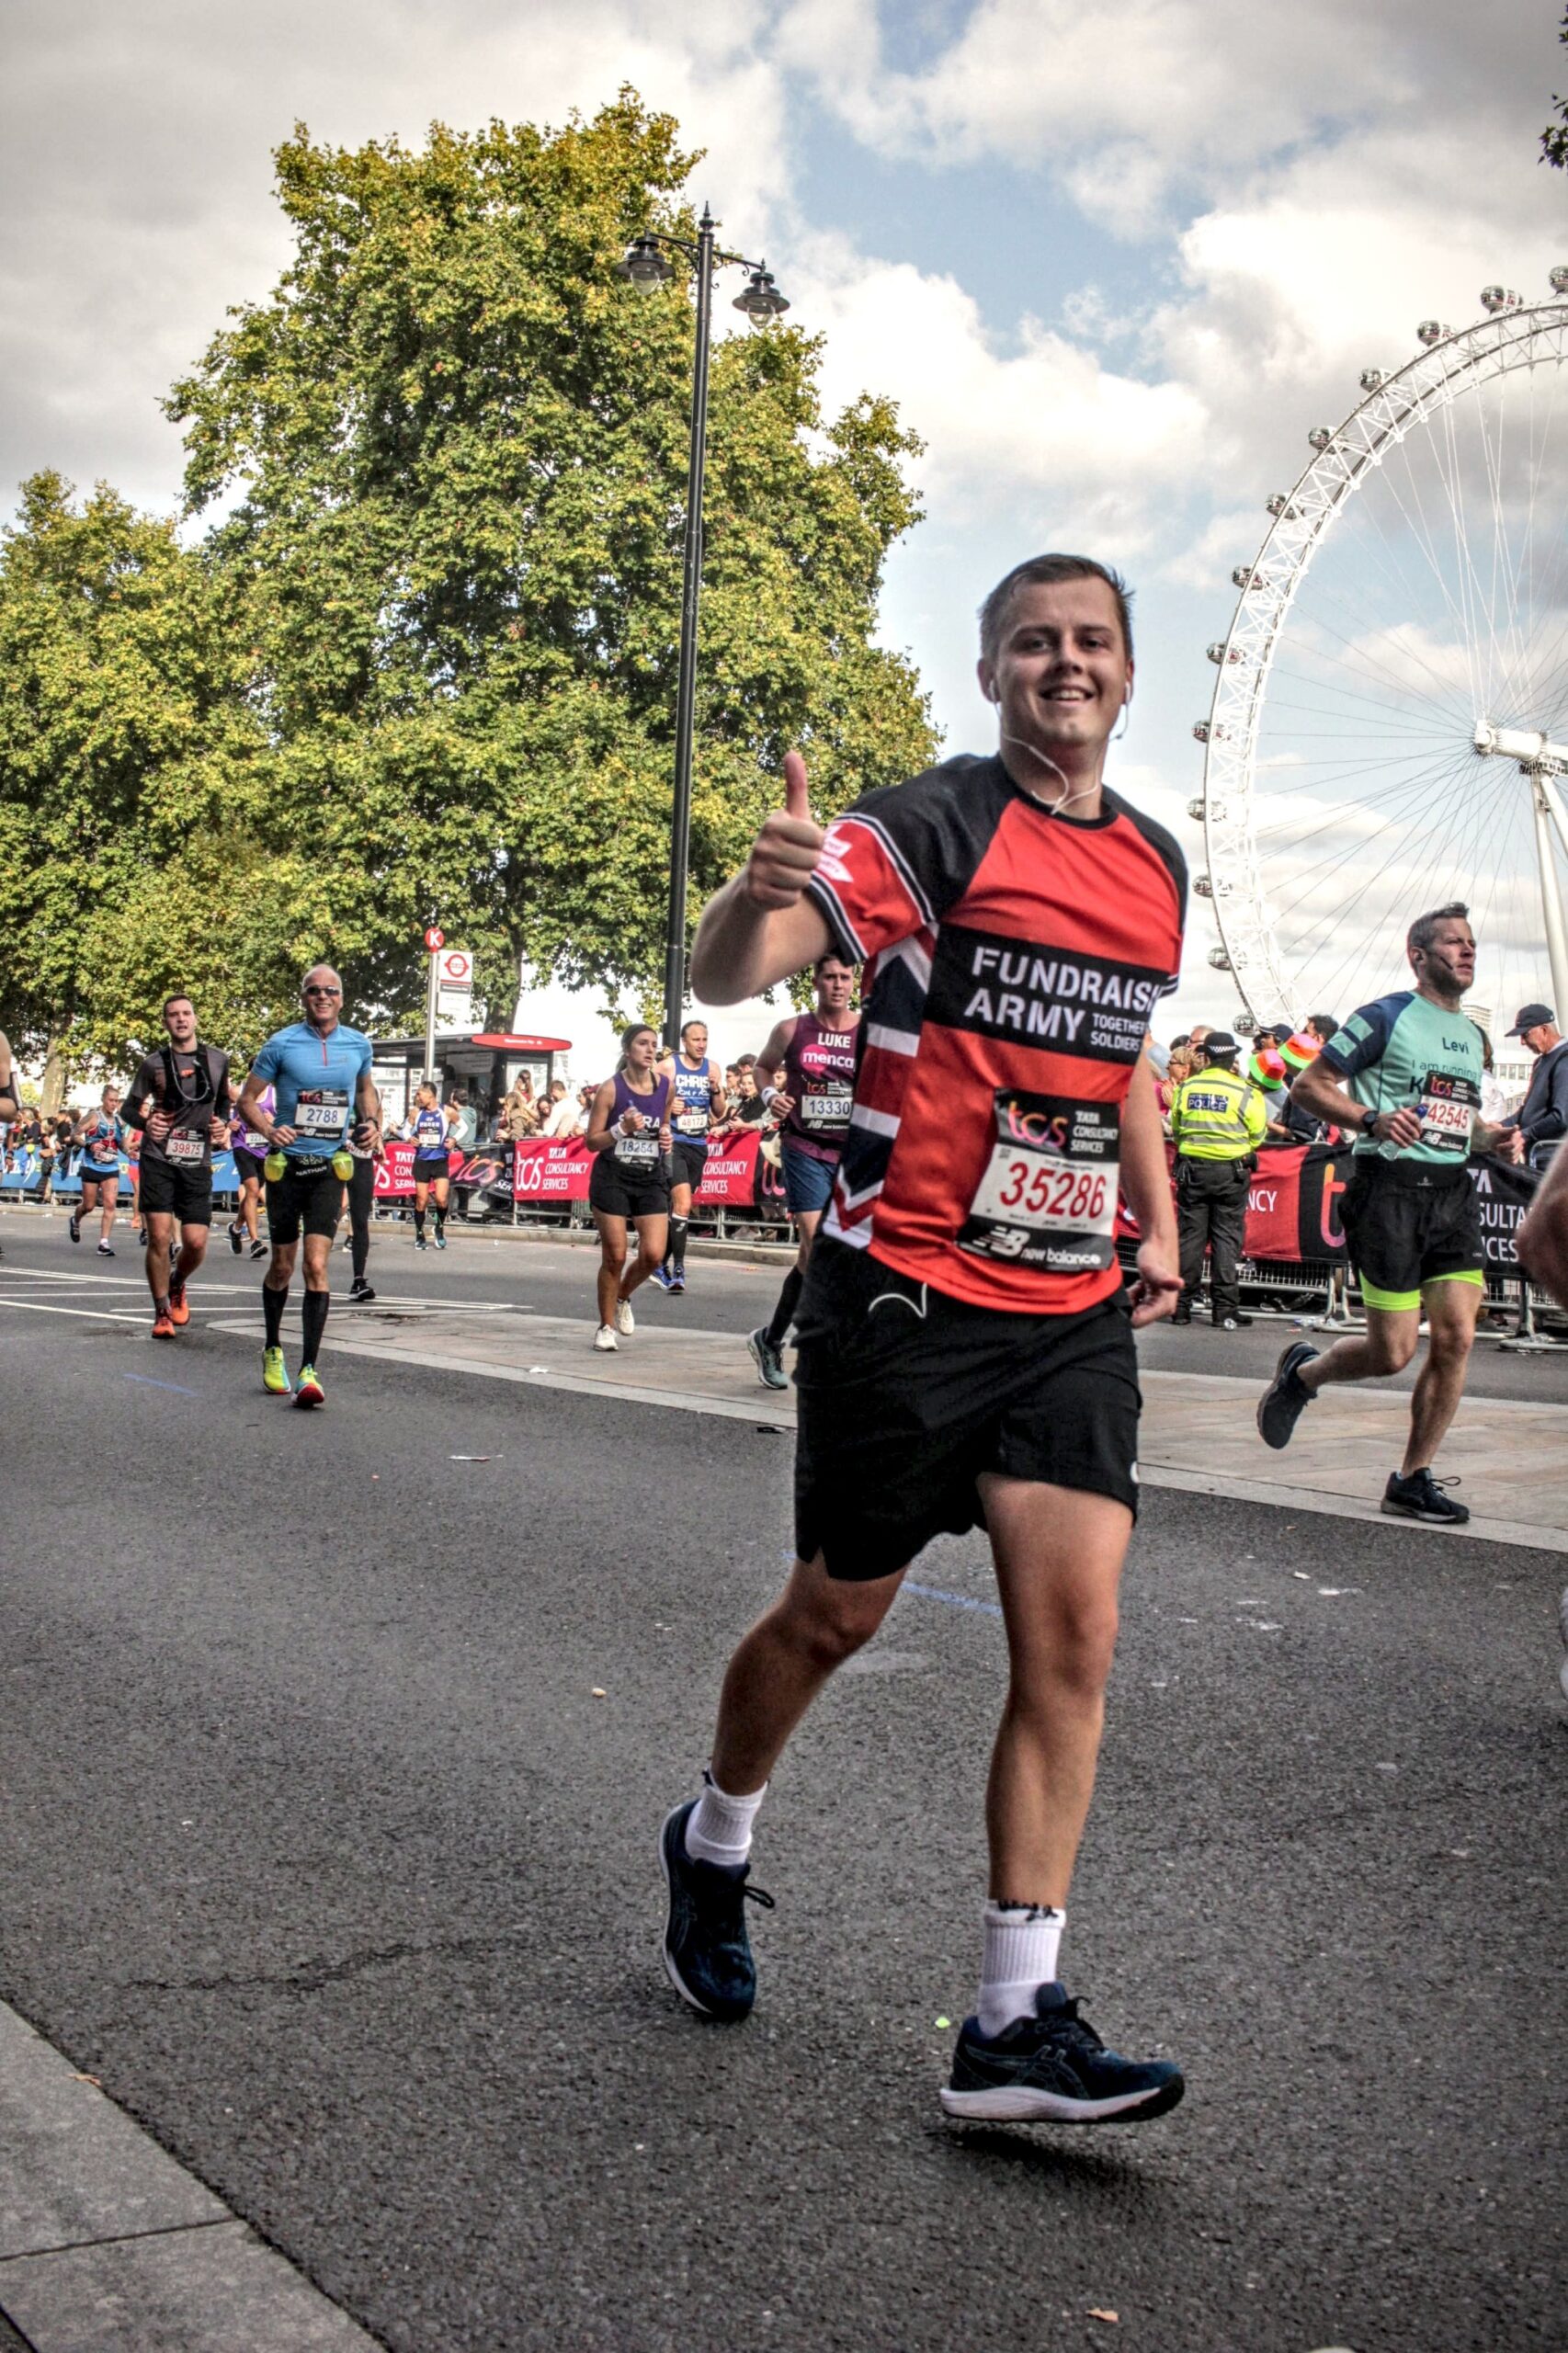 Matt Hale running the London marathon 2022 in support of abf soldiers charity